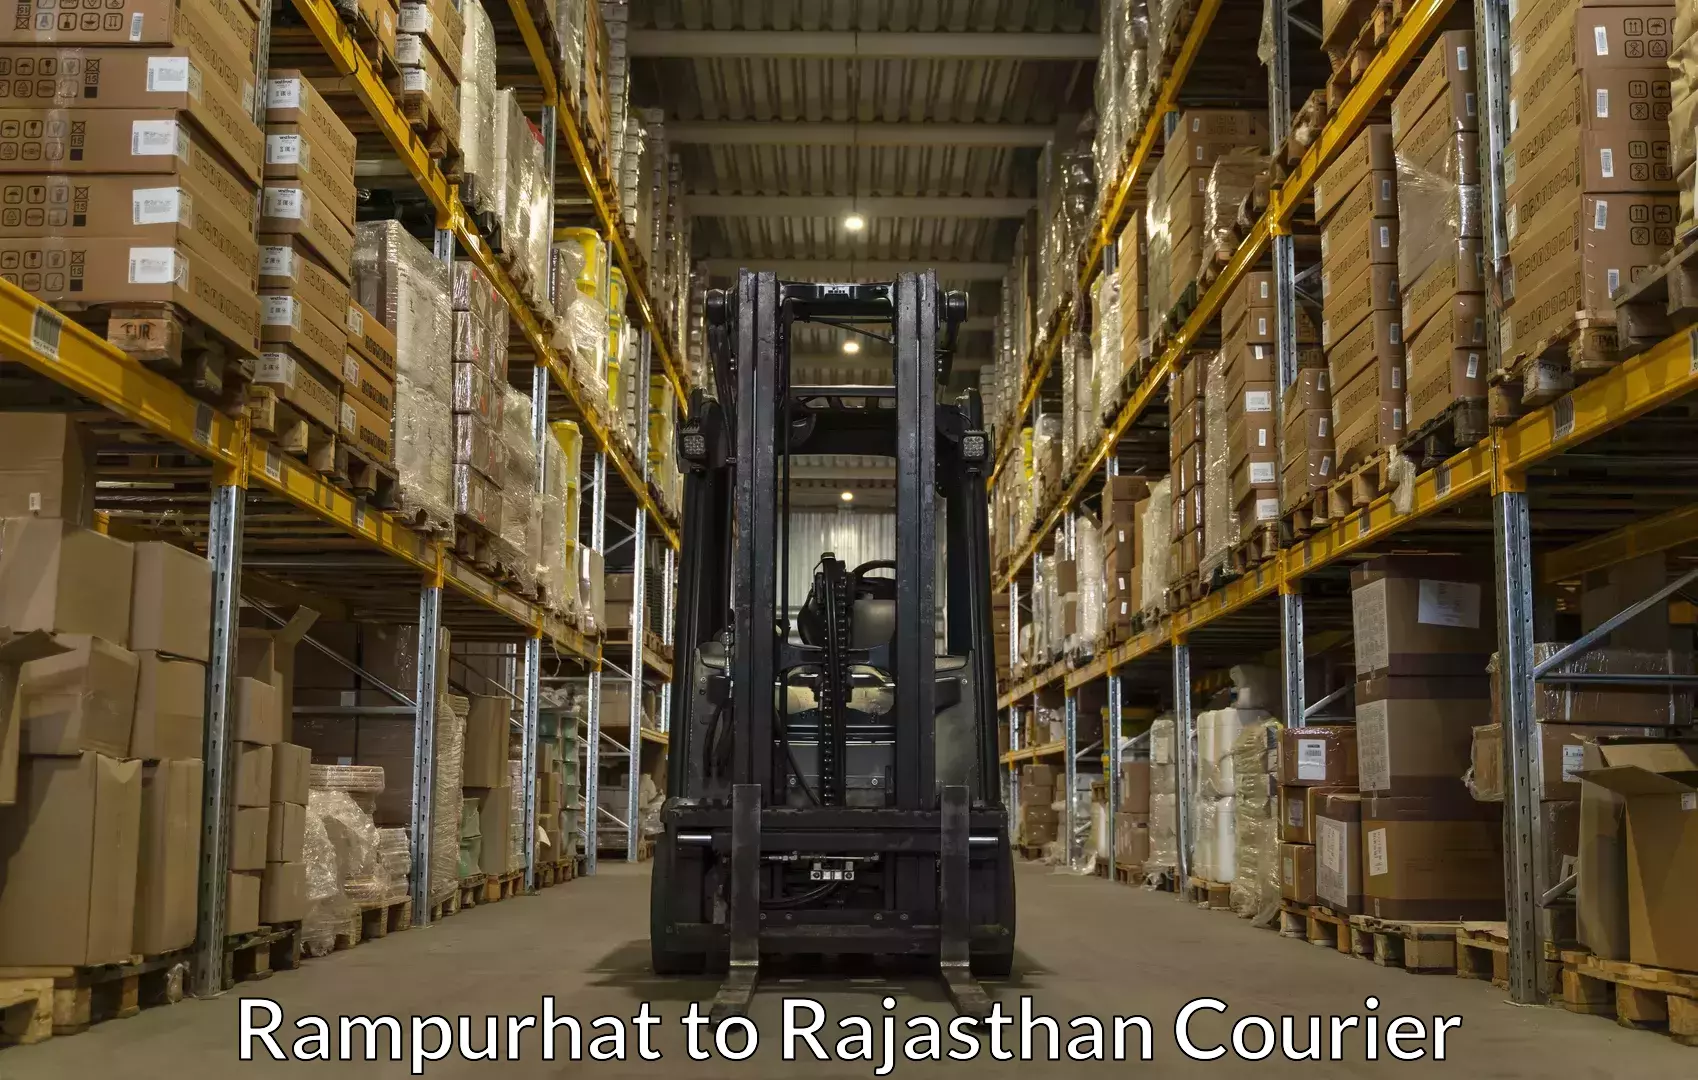 Baggage shipping experts Rampurhat to Yeswanthapur